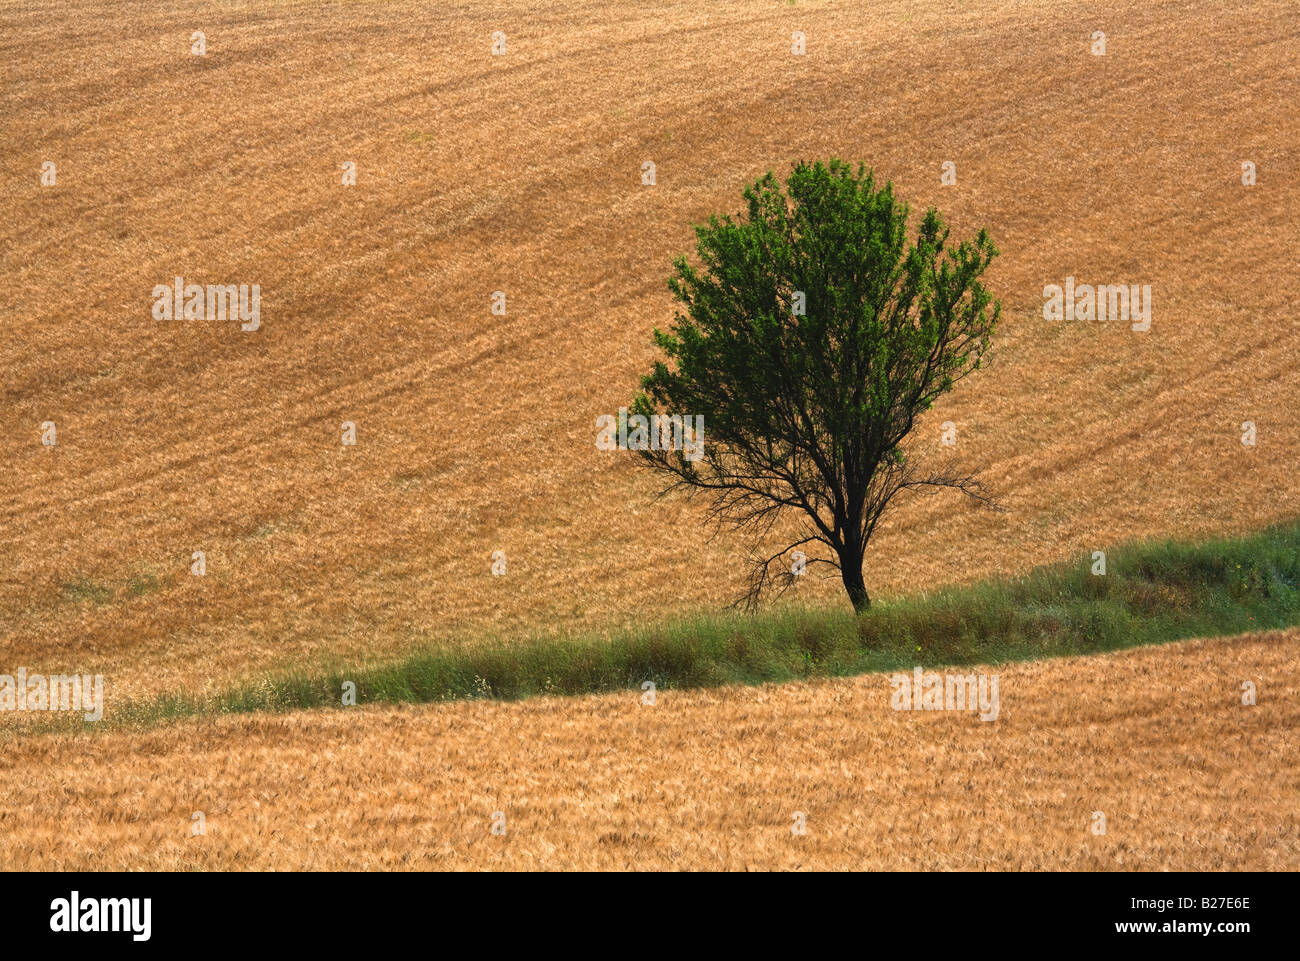 A typical view of a tree in the French countryside  near Valensole, Provence. Stock Photo